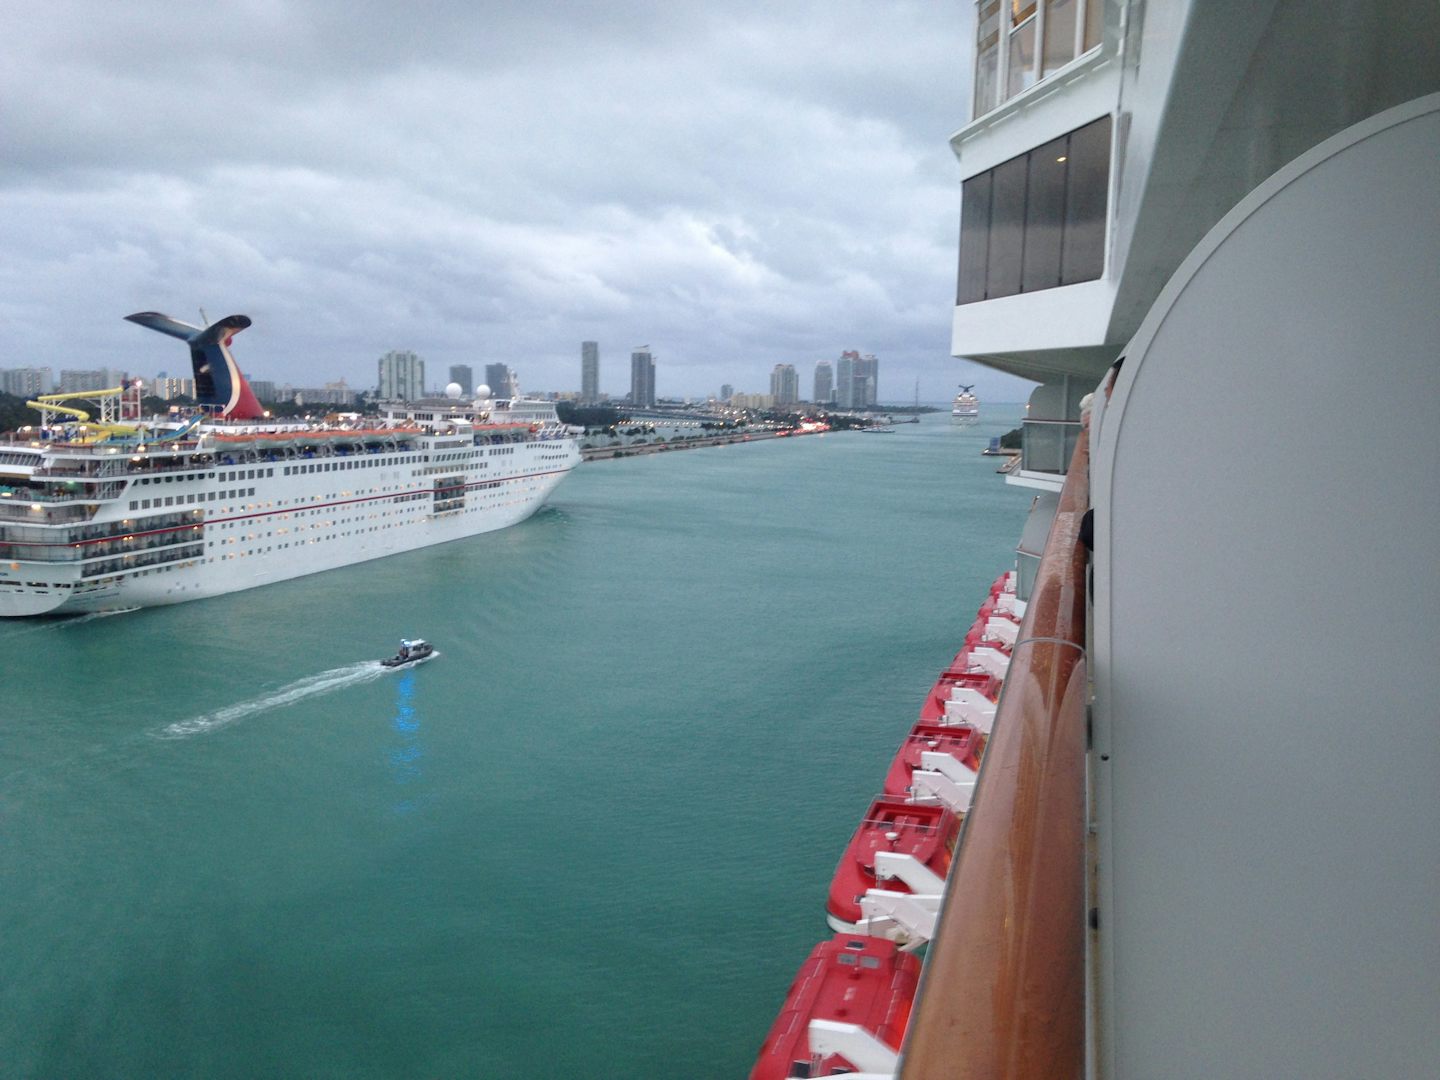 Exciting view from Stateroom balcony at Port of Miami, just moments prior to departure.